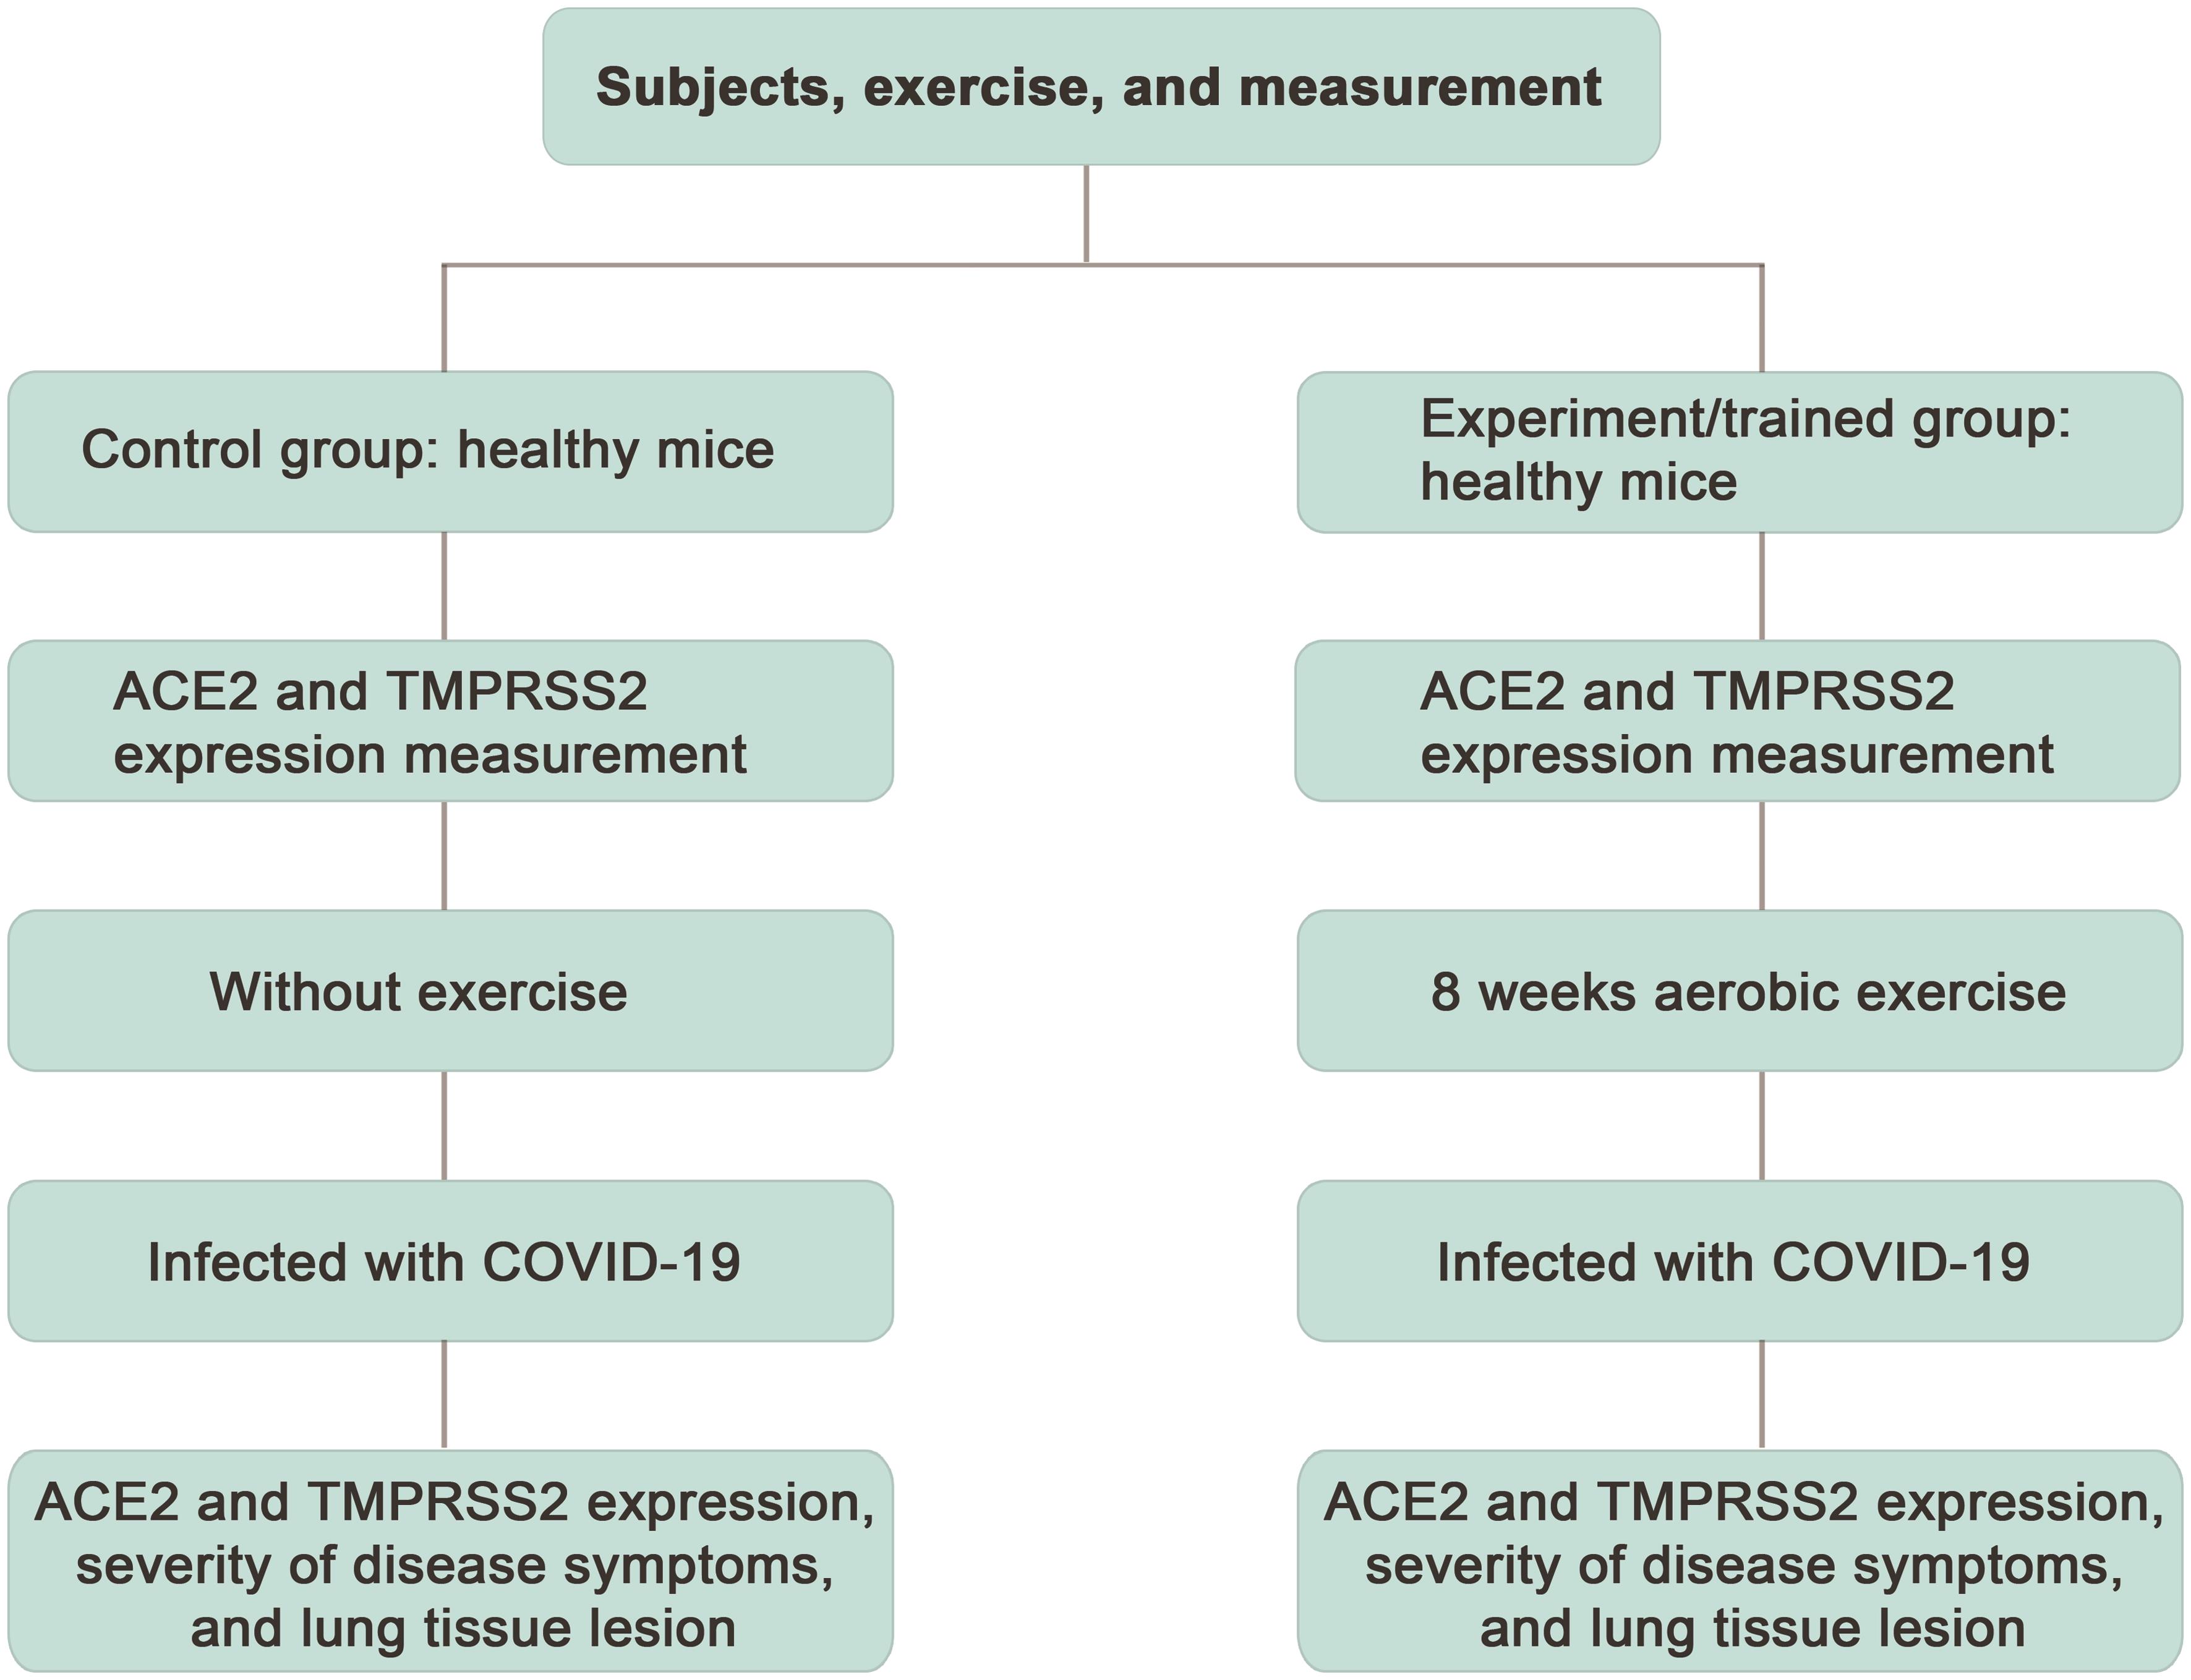 Diagram of subjects, measurements, and exercise training in both groups.